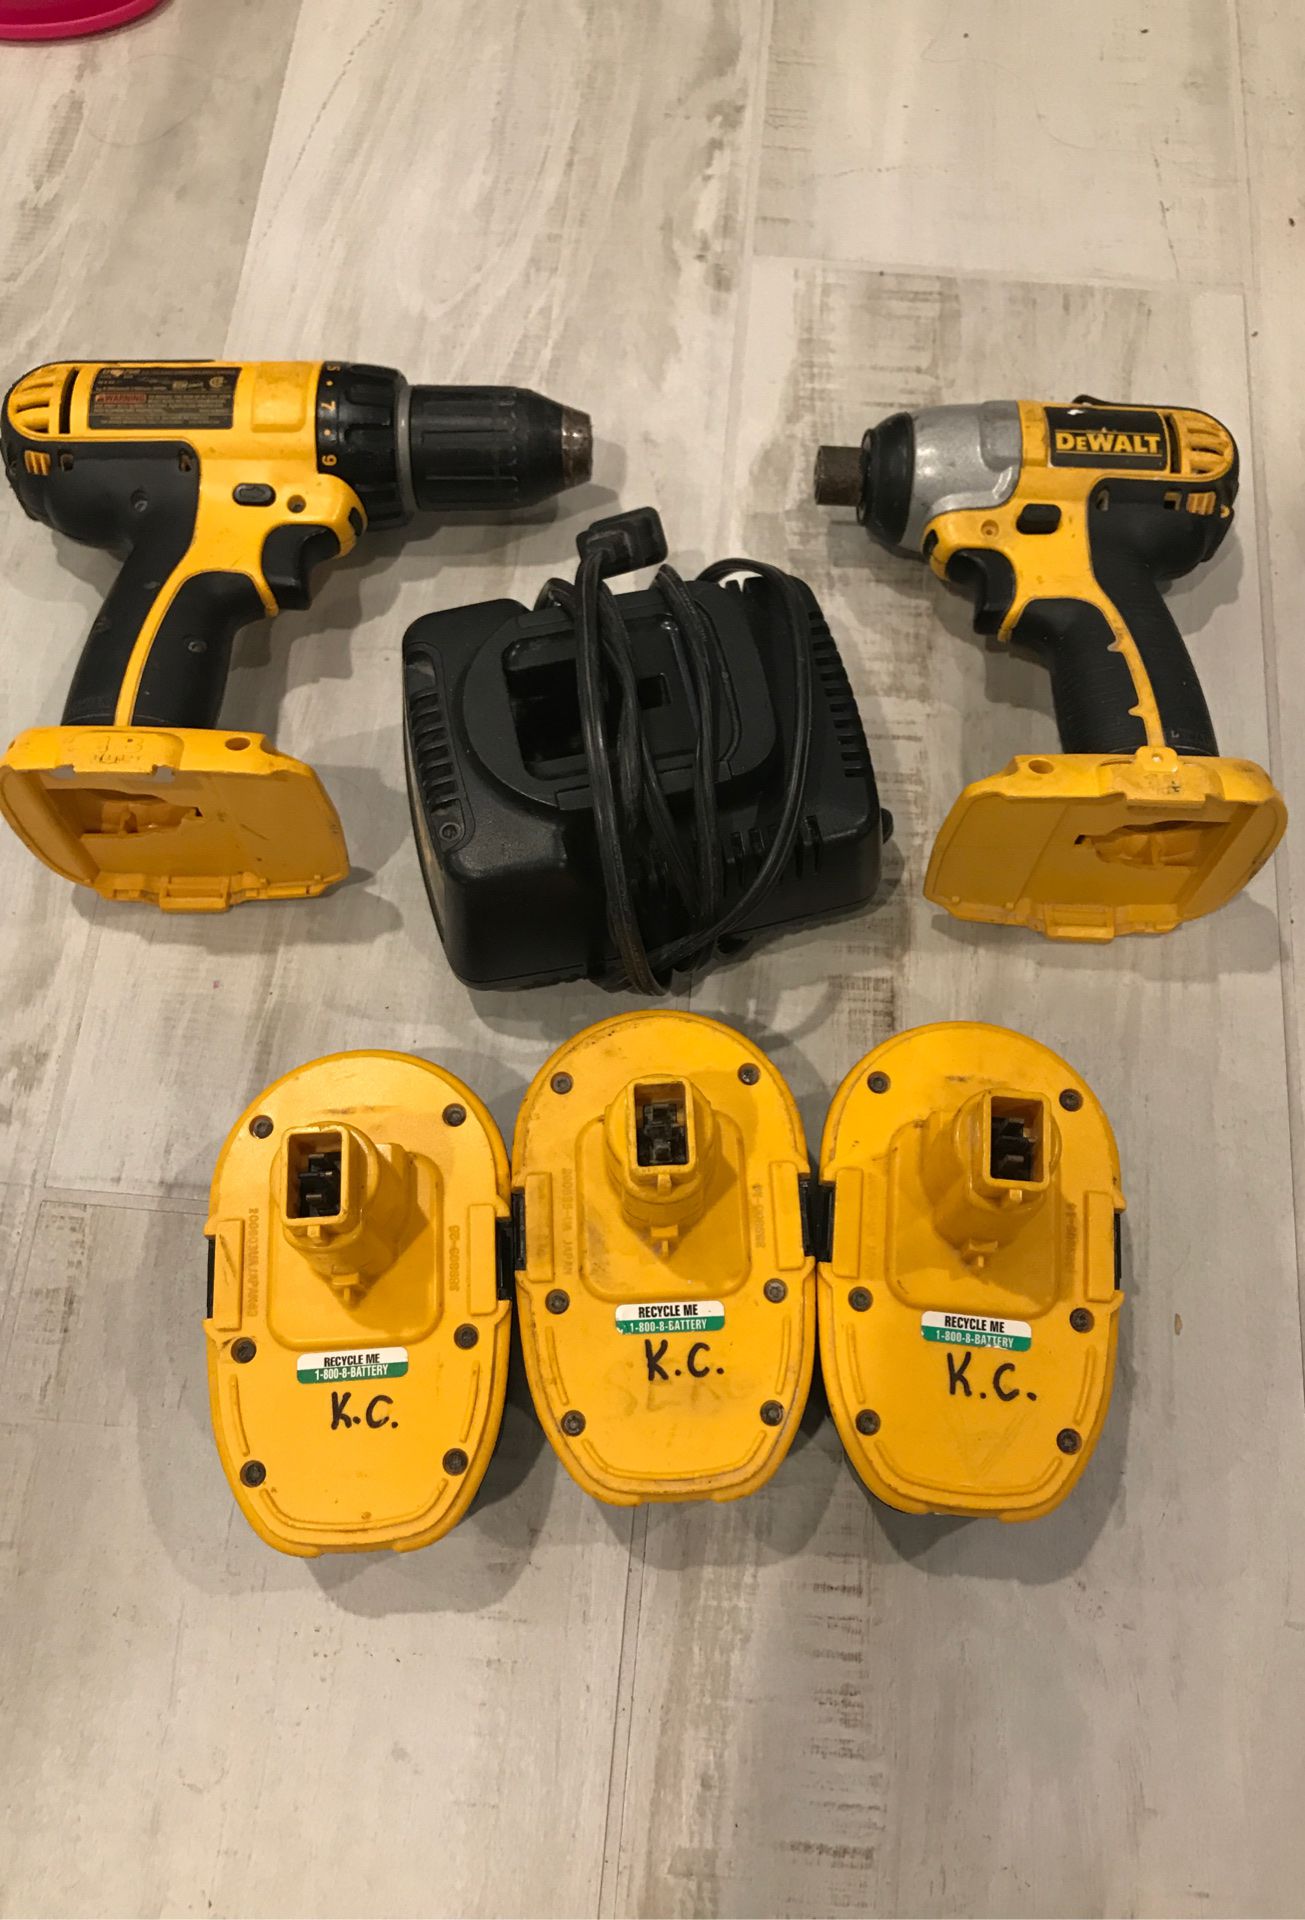 Dewalt 18V drill set with charger and 3 batteries